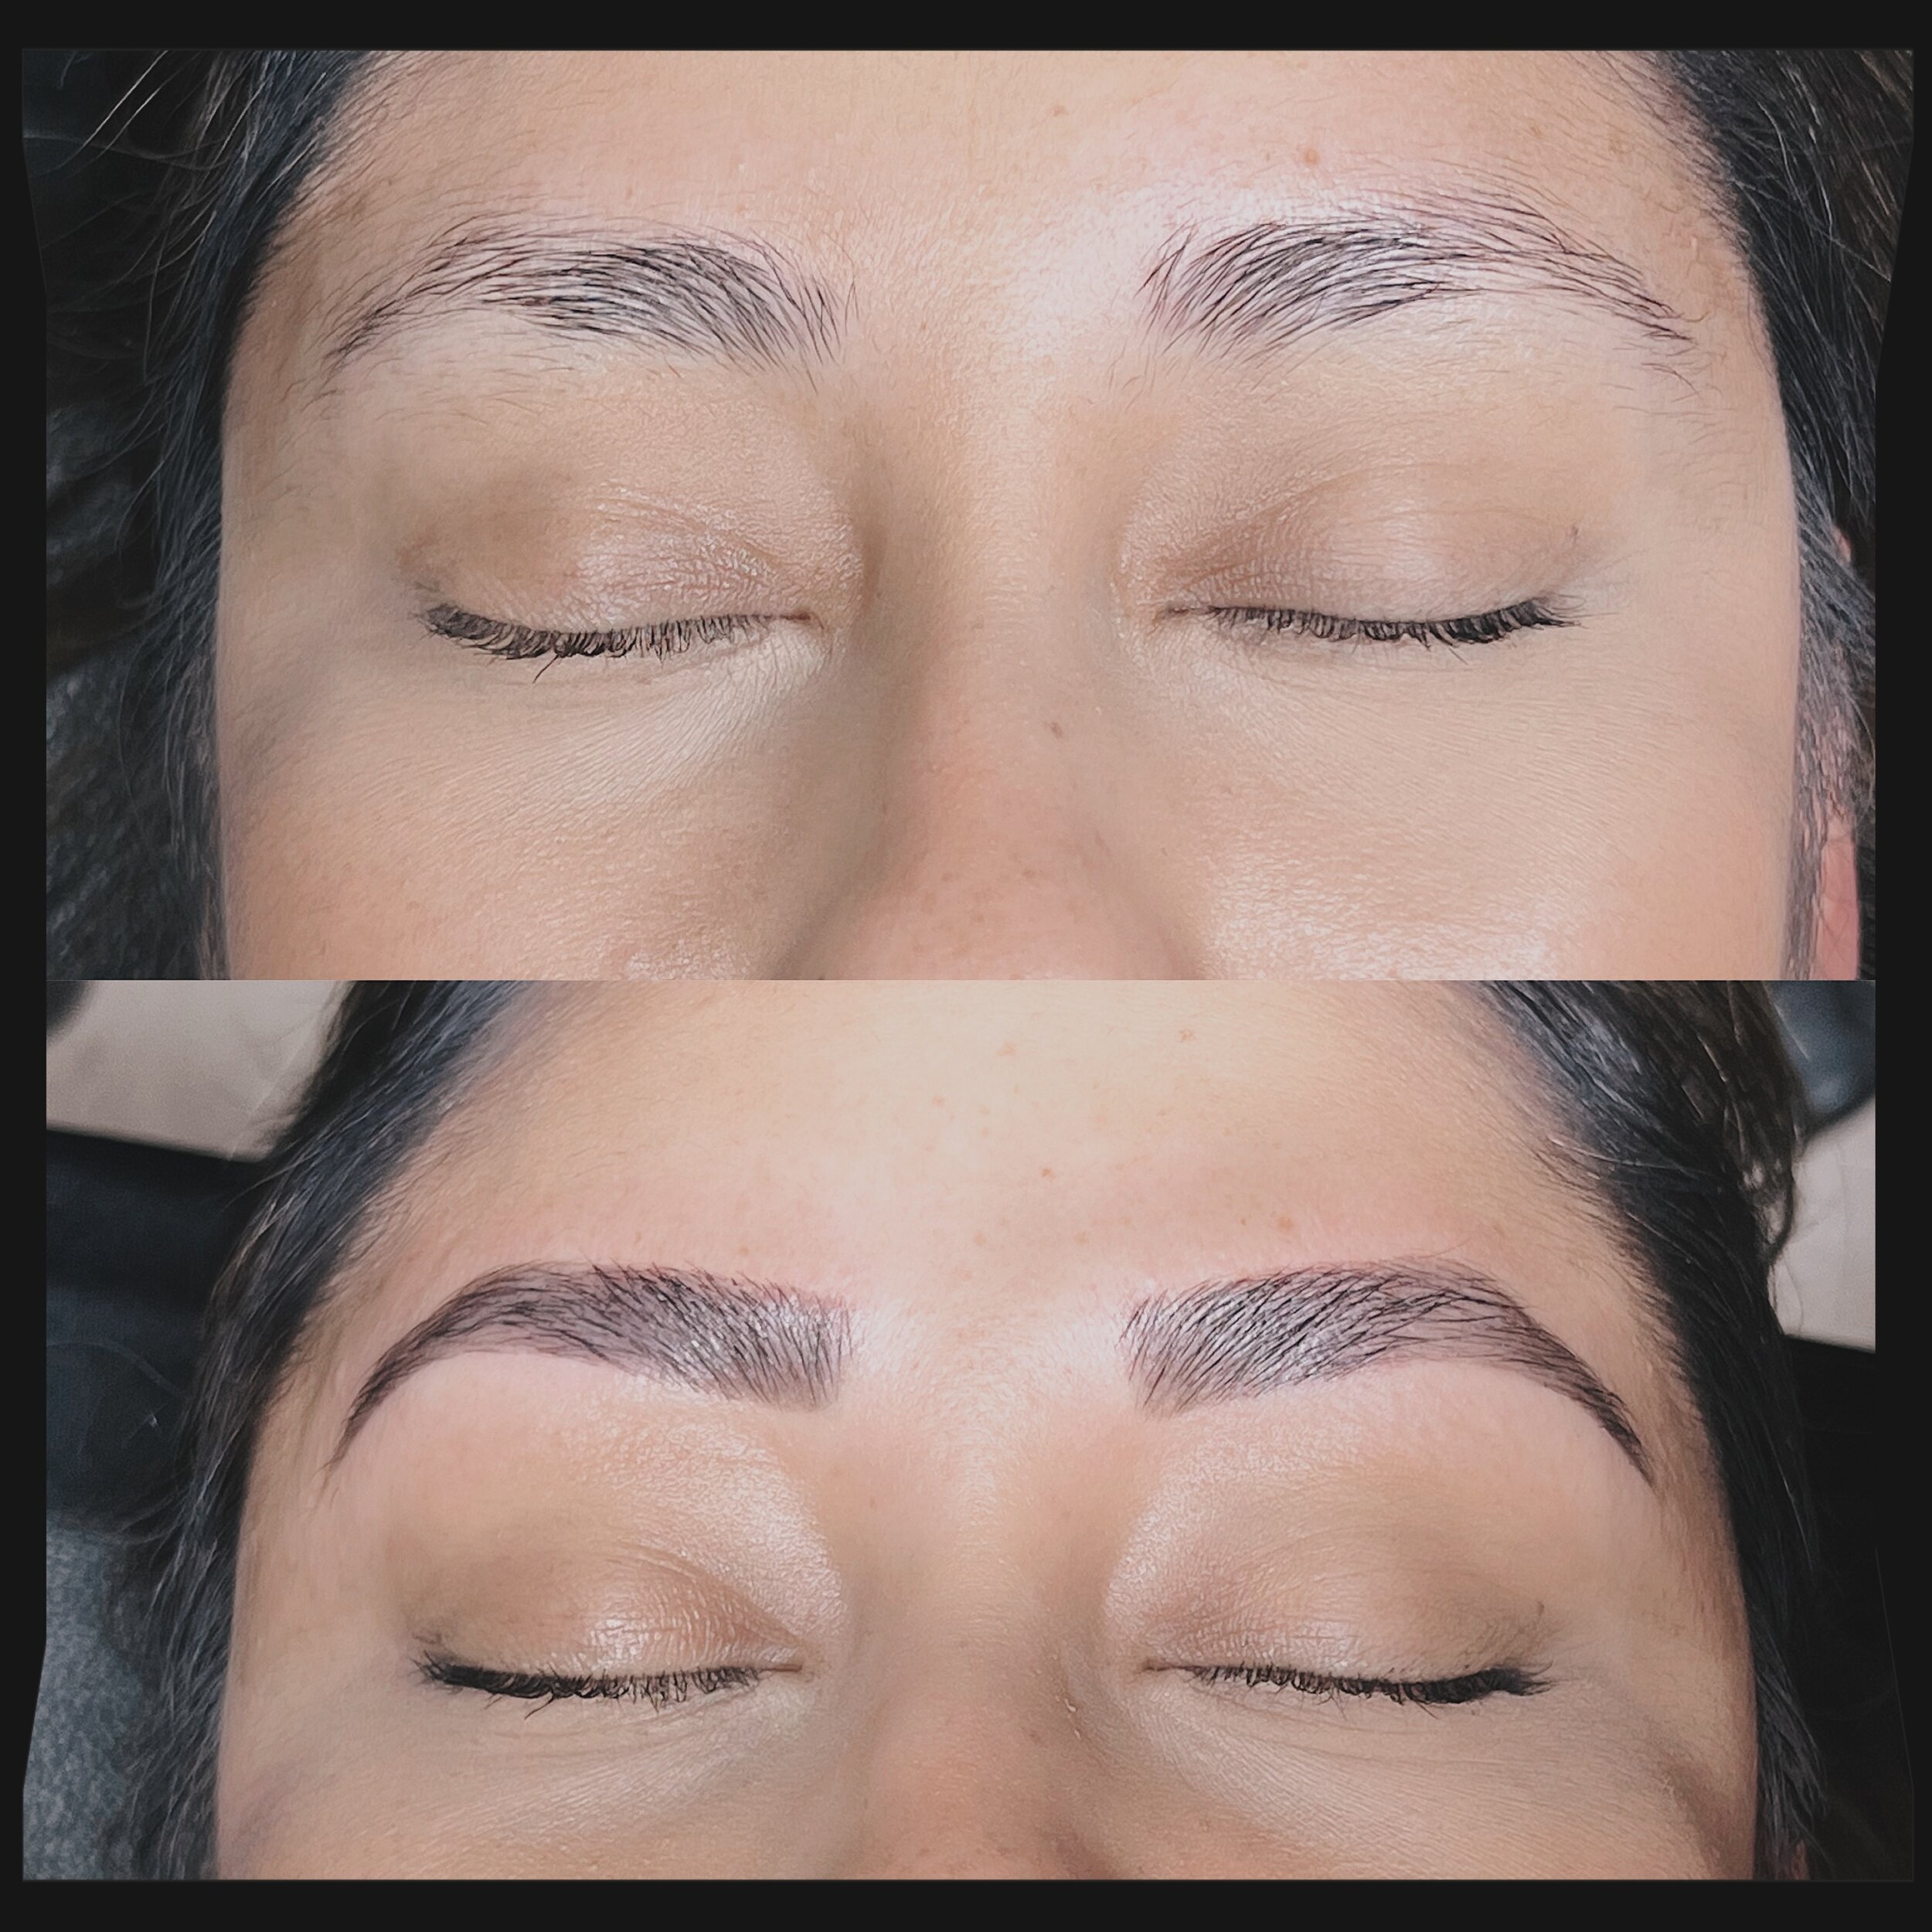 New client, brow wax &amp; tint transformation! 

Tint helps the brows appear fuller by filling in on the skin where the brow hairs are sparse!.

Tint can last up to 7 days on the skin depending on your skin type and lifestyle! &amp; up to 2/3 weeks 